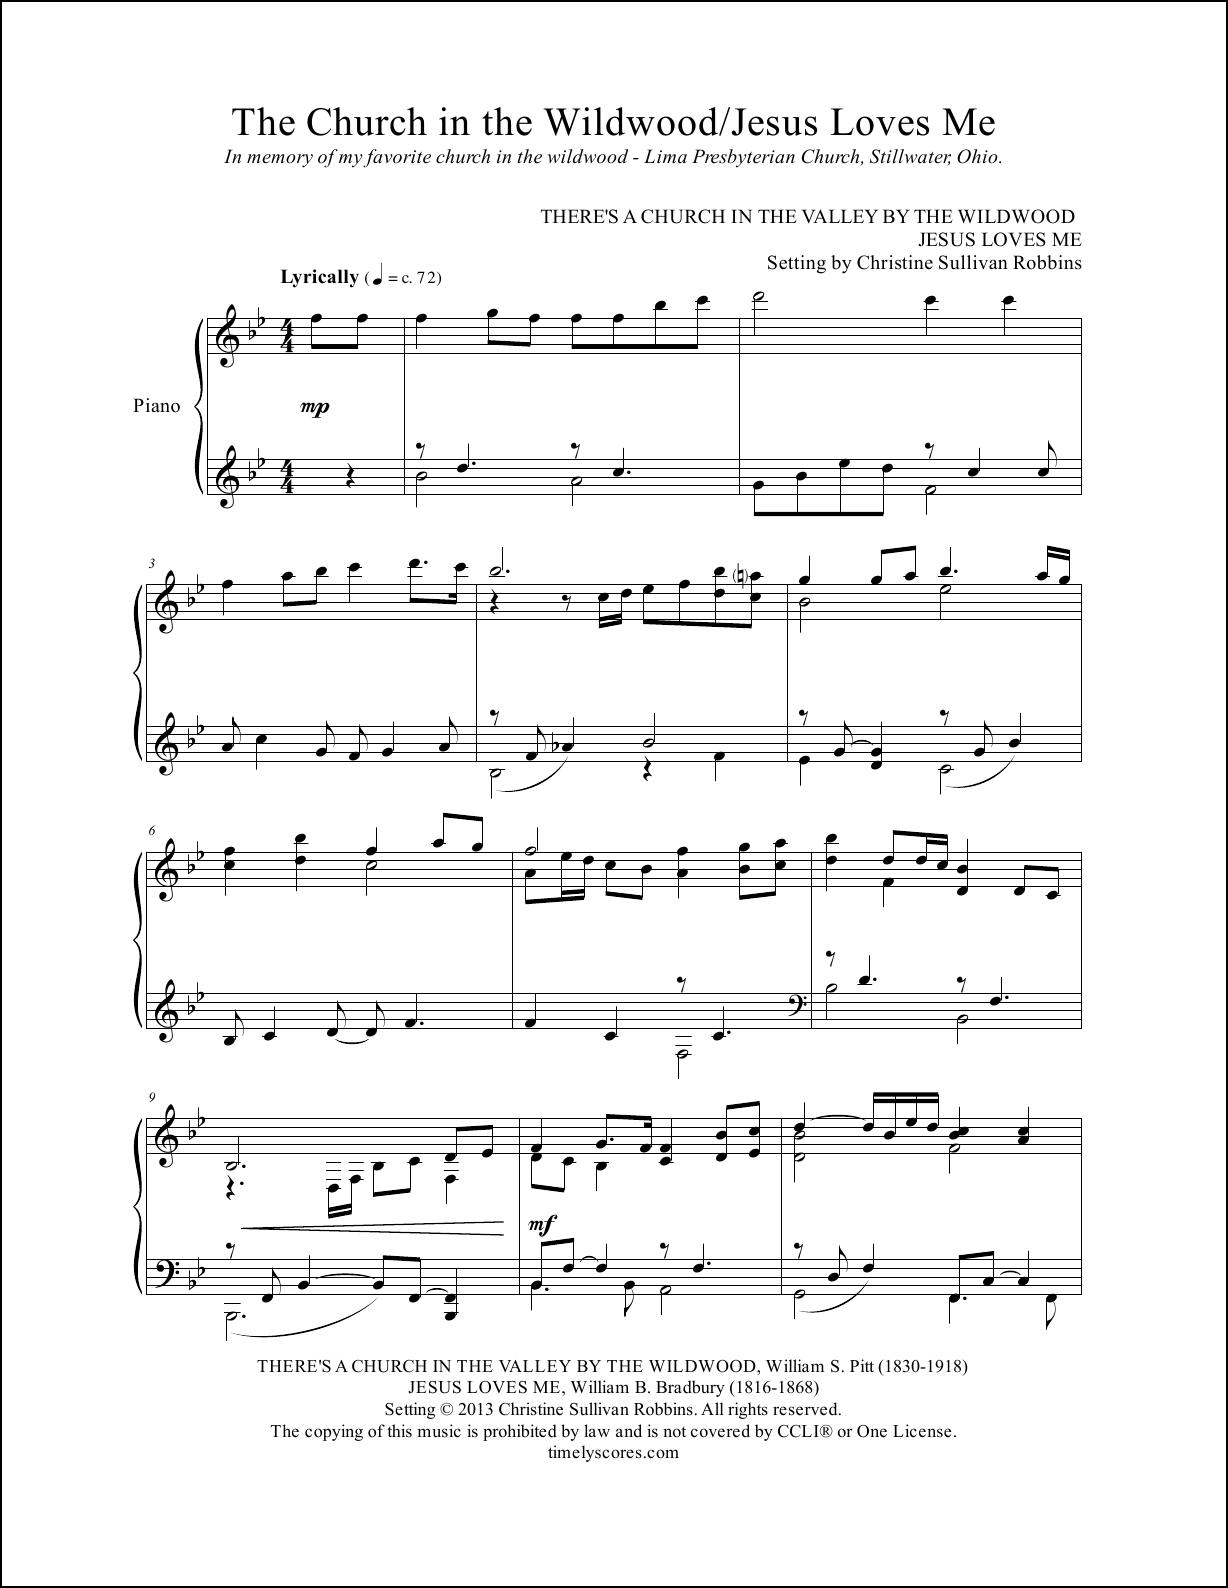 The Church in the Wildwood with Jesus Loves Me Piano Sheet Music